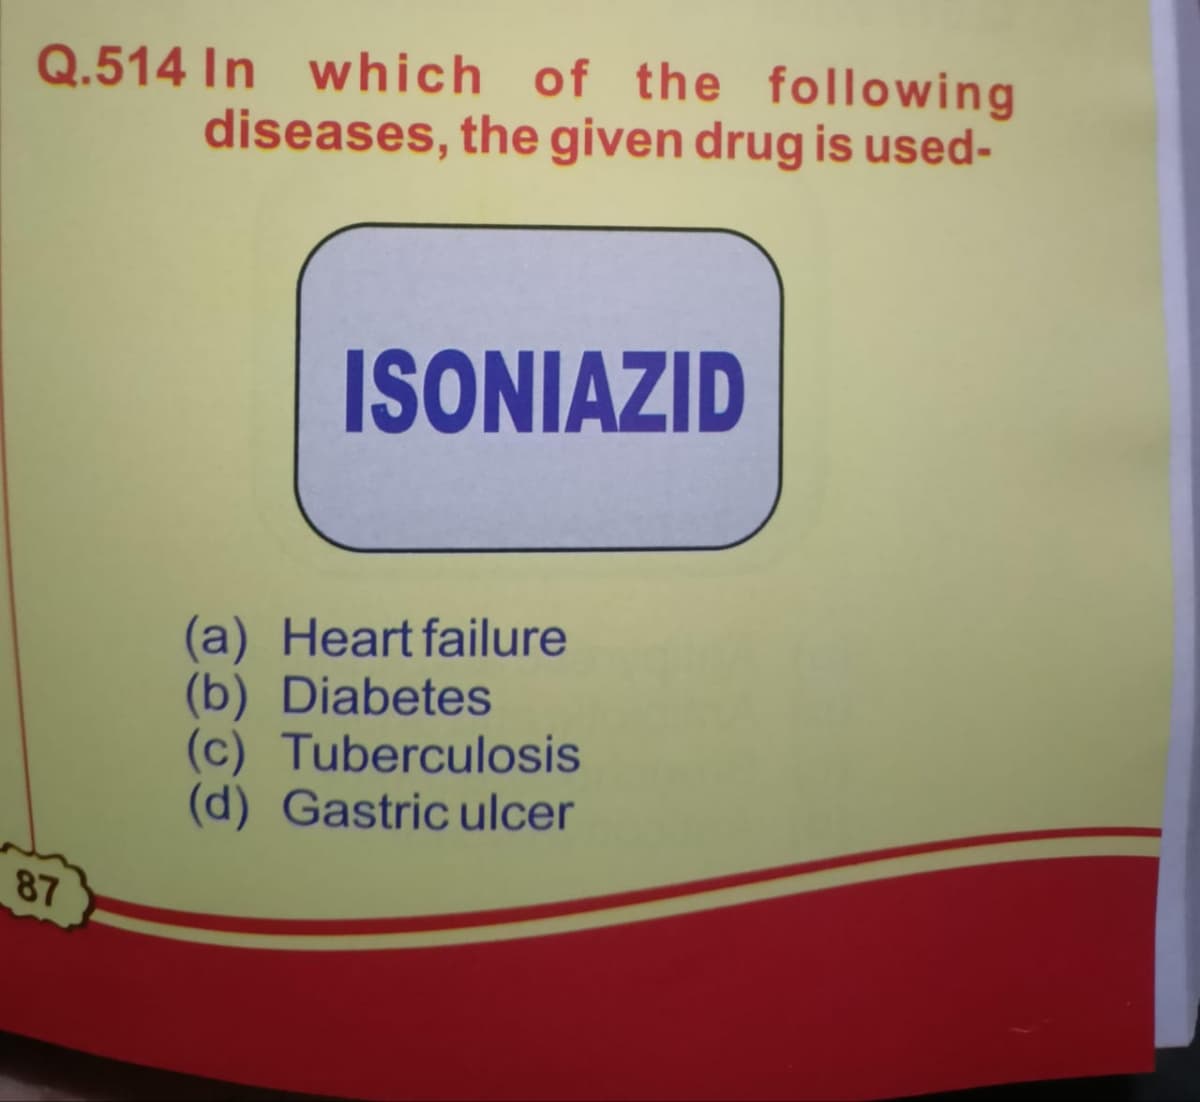 Q.514 In which of the following
diseases, the given drug is used-
87
ISONIAZID
(a) Heart failure
(b) Diabetes
(c) Tuberculosis
(d) Gastric ulcer